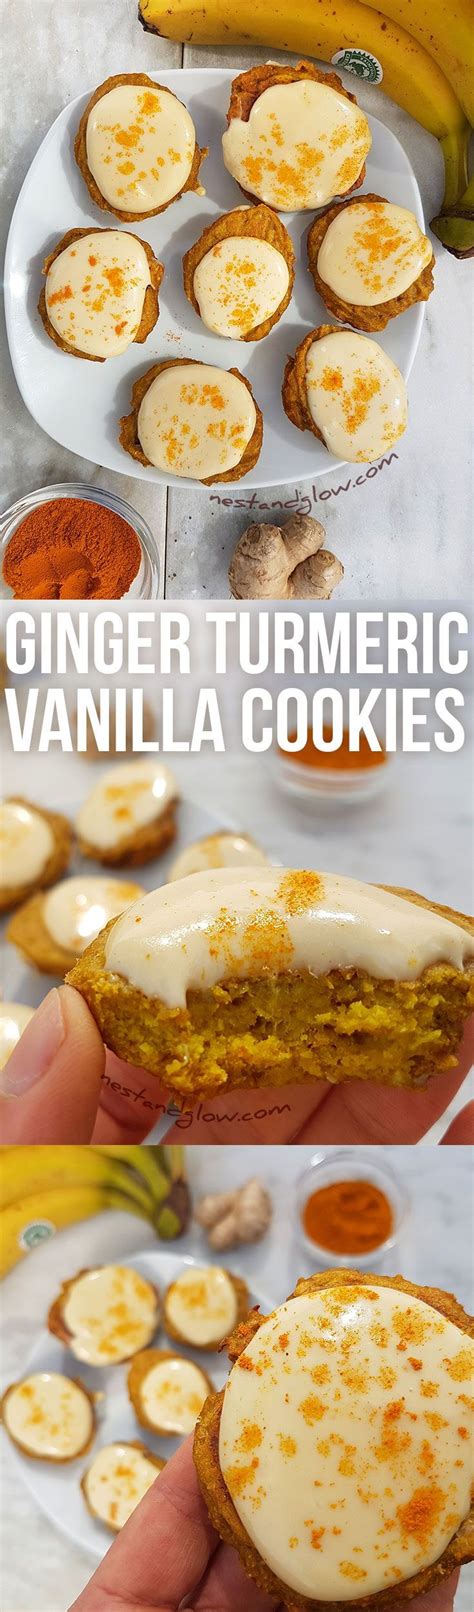 These healthy golden ginger turmeric cookies are flour free and easy to make. Ginger Turmeric Cashew Cookies | Recipe (With images ...